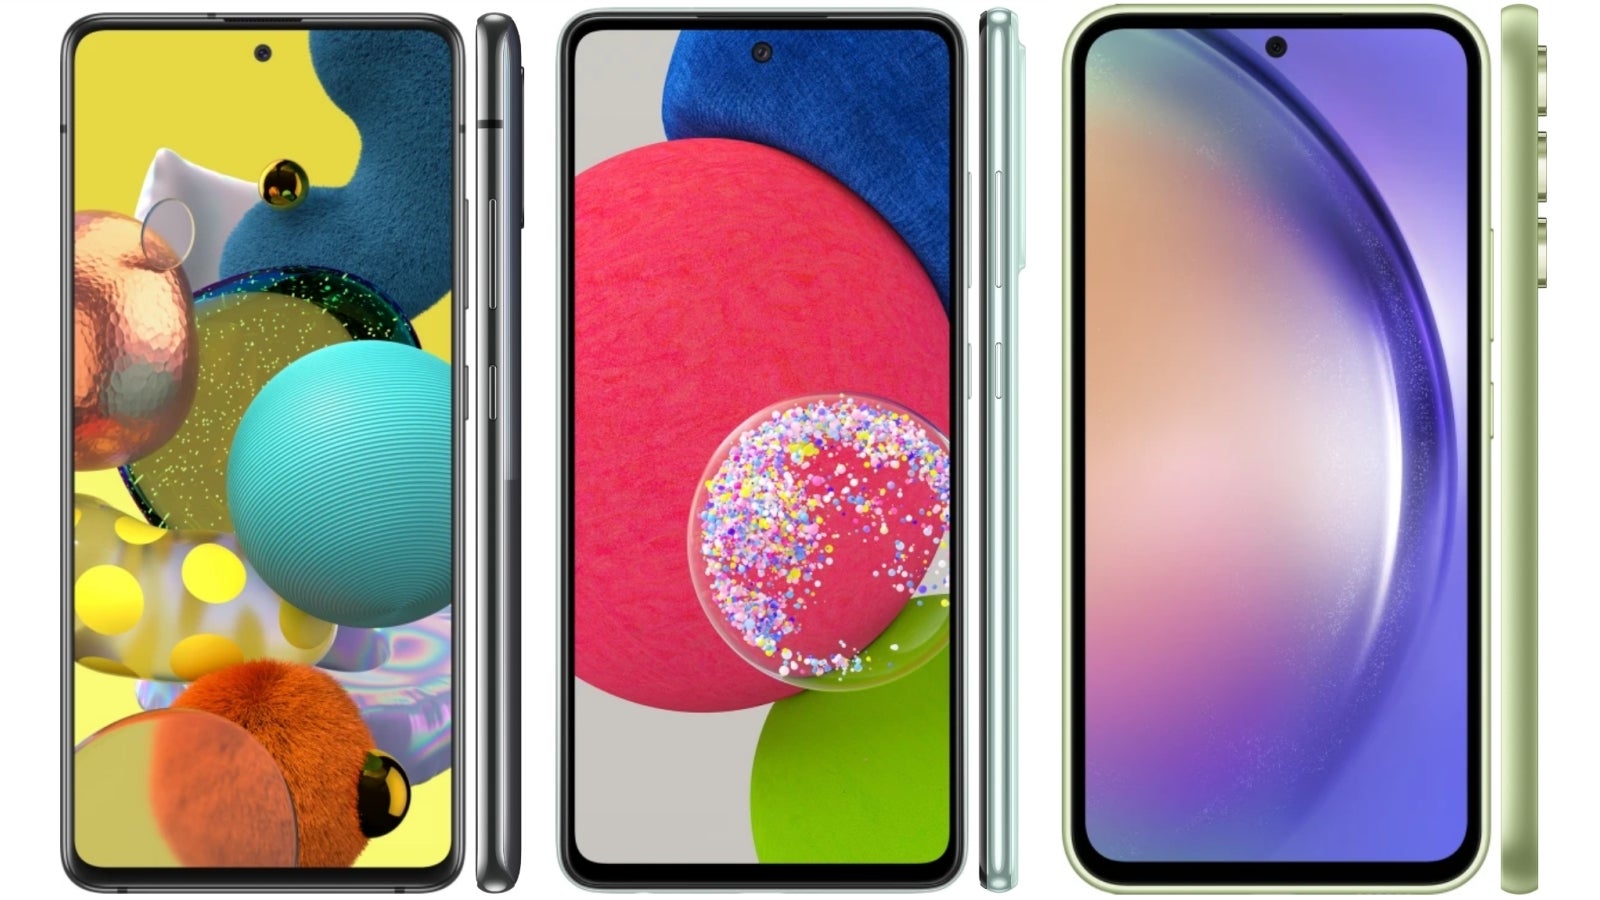 The 2019 Galaxy A51 on the left, the 2021 Galaxy A52 in the middle, and the brand new Galaxy A54 on the right. We see a trend of thicker display borders on the newer phones. - Galaxy A54 - Samsung now makes cheaper phones worse to get people to spend more on Galaxy S23?